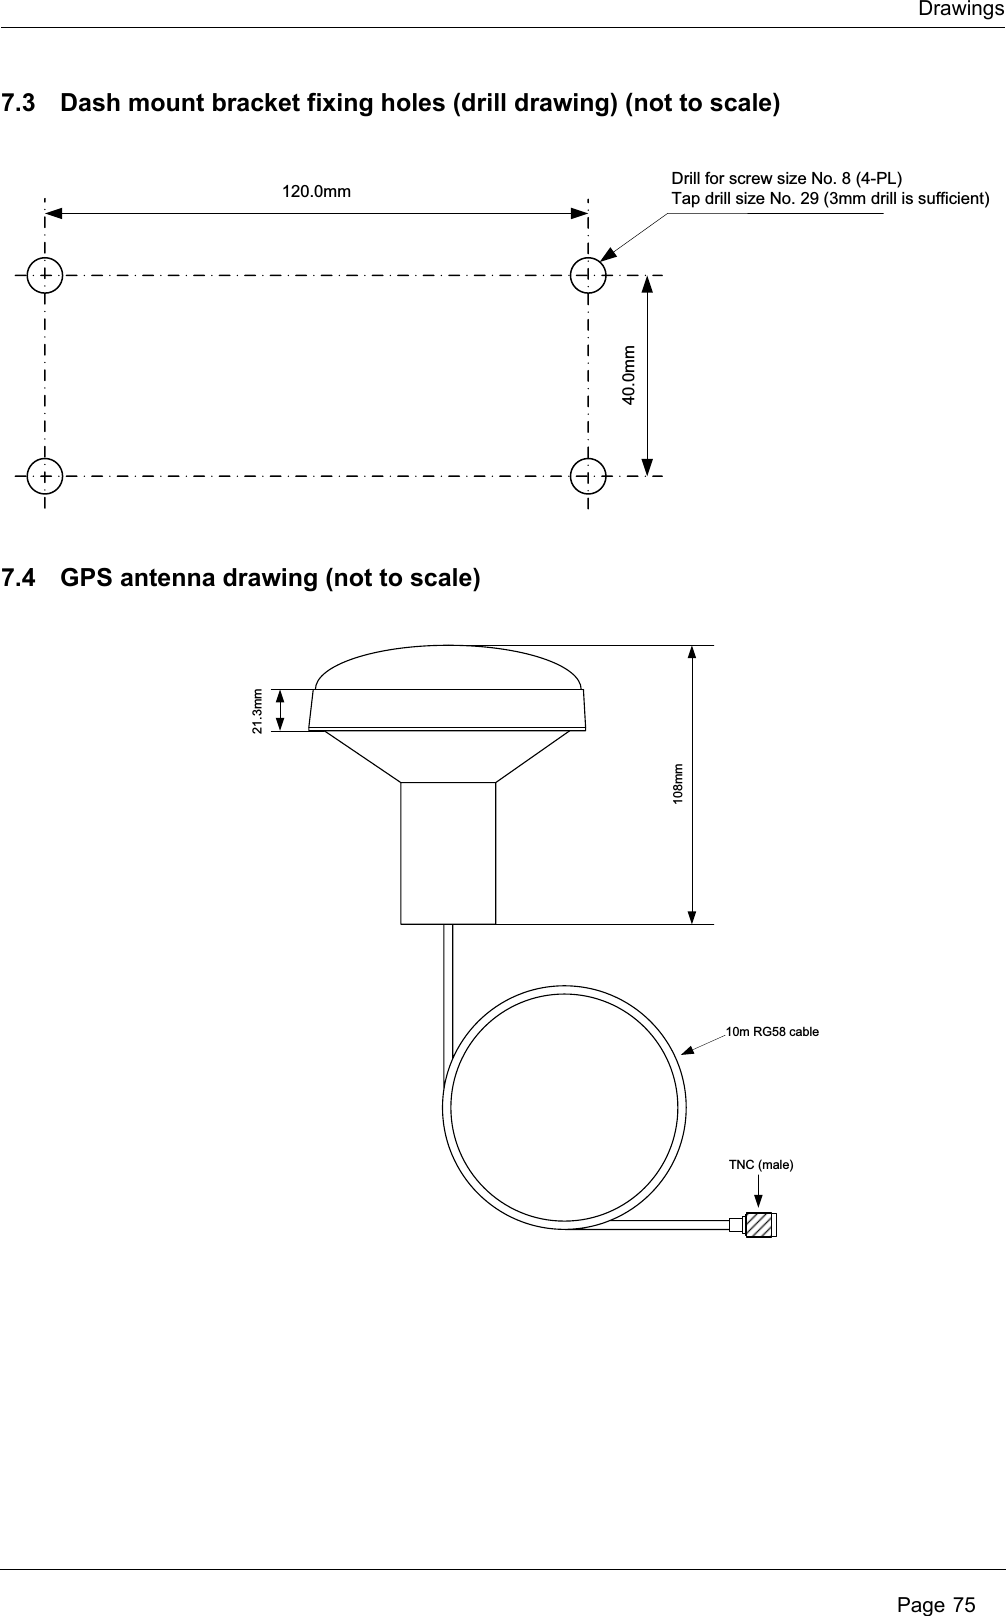 DrawingsPage 757.3 Dash mount bracket fixing holes (drill drawing) (not to scale)7.4 GPS antenna drawing (not to scale)120.0mm40.0mmDrill for screw size No. 8 (4-PL)Tap drill size No. 29 (3mm drill is sufficient)108mm21.3mm10m RG58 cableTNC (male)